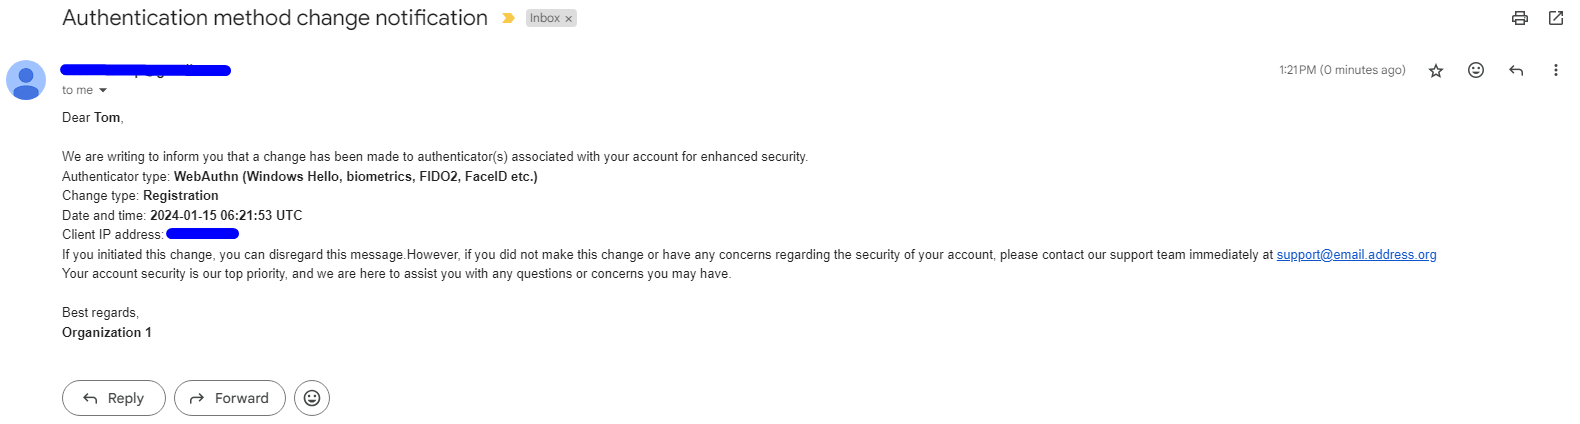 email-notification-update-authenticators.png